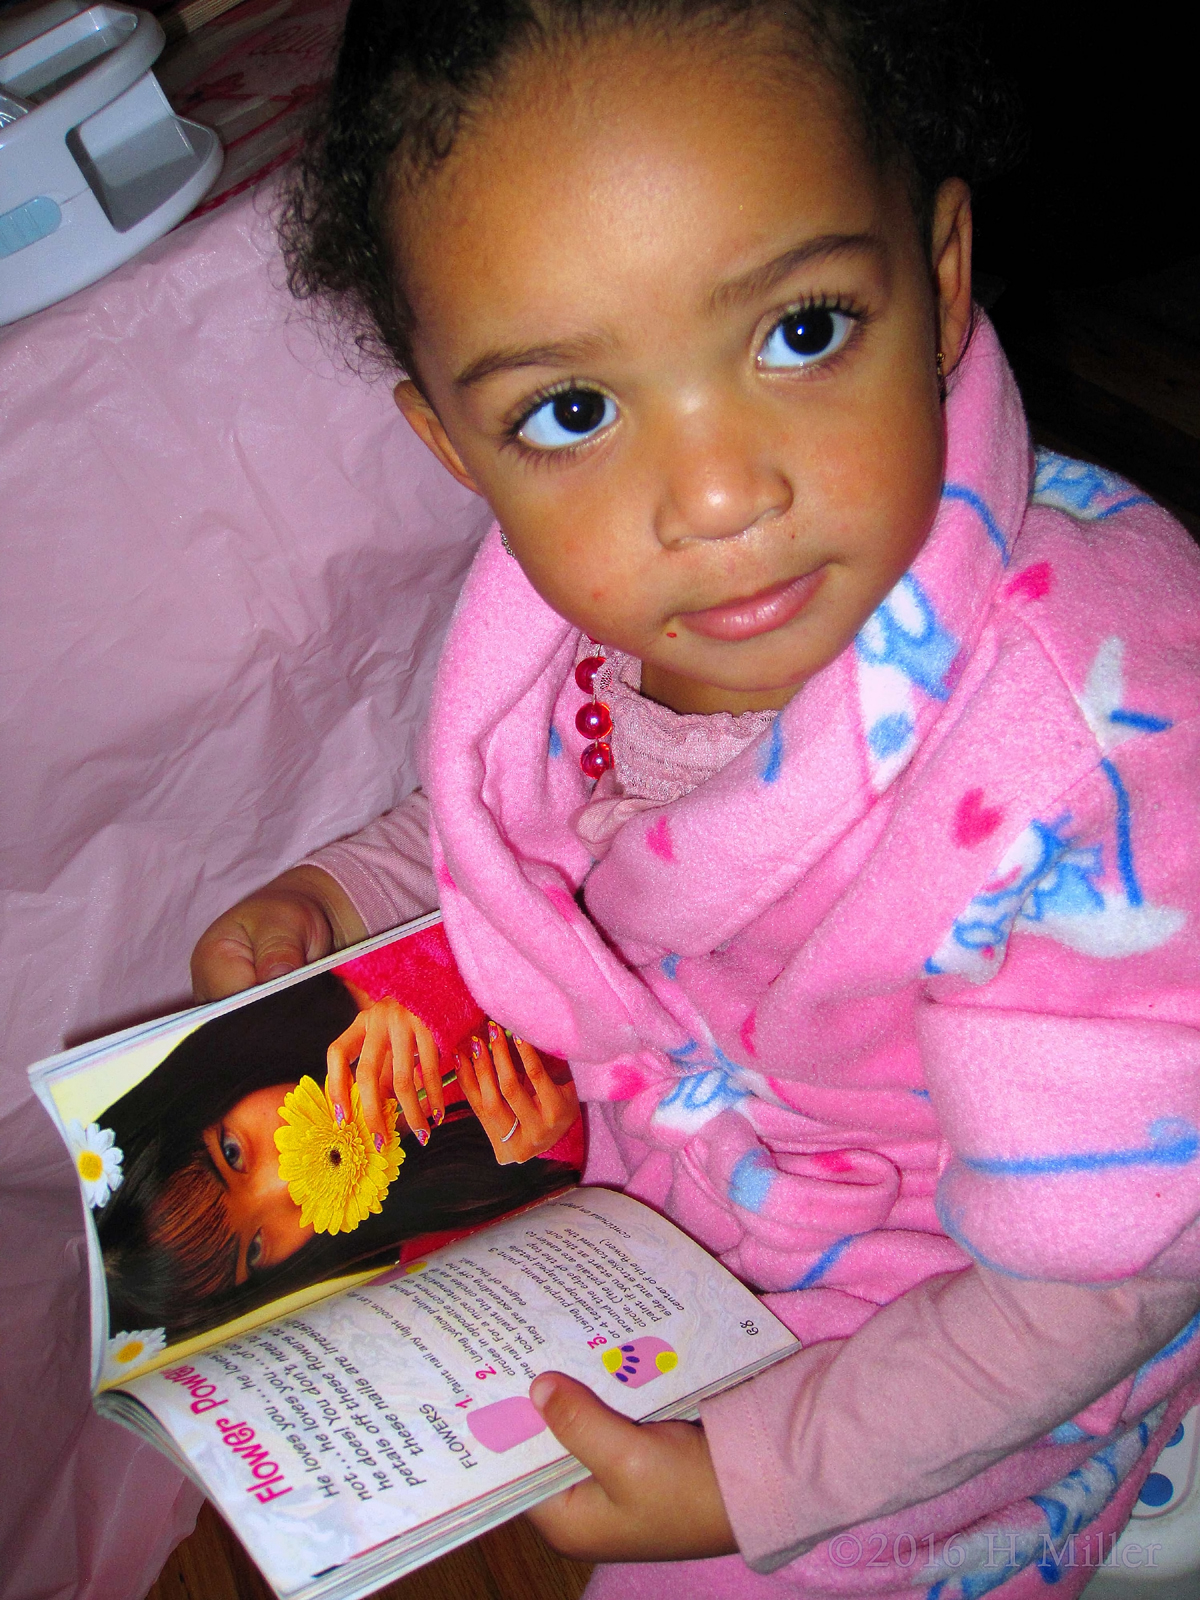 Looking At Nail Art Books To Get Ideas For Her Favorite Nail Design. 